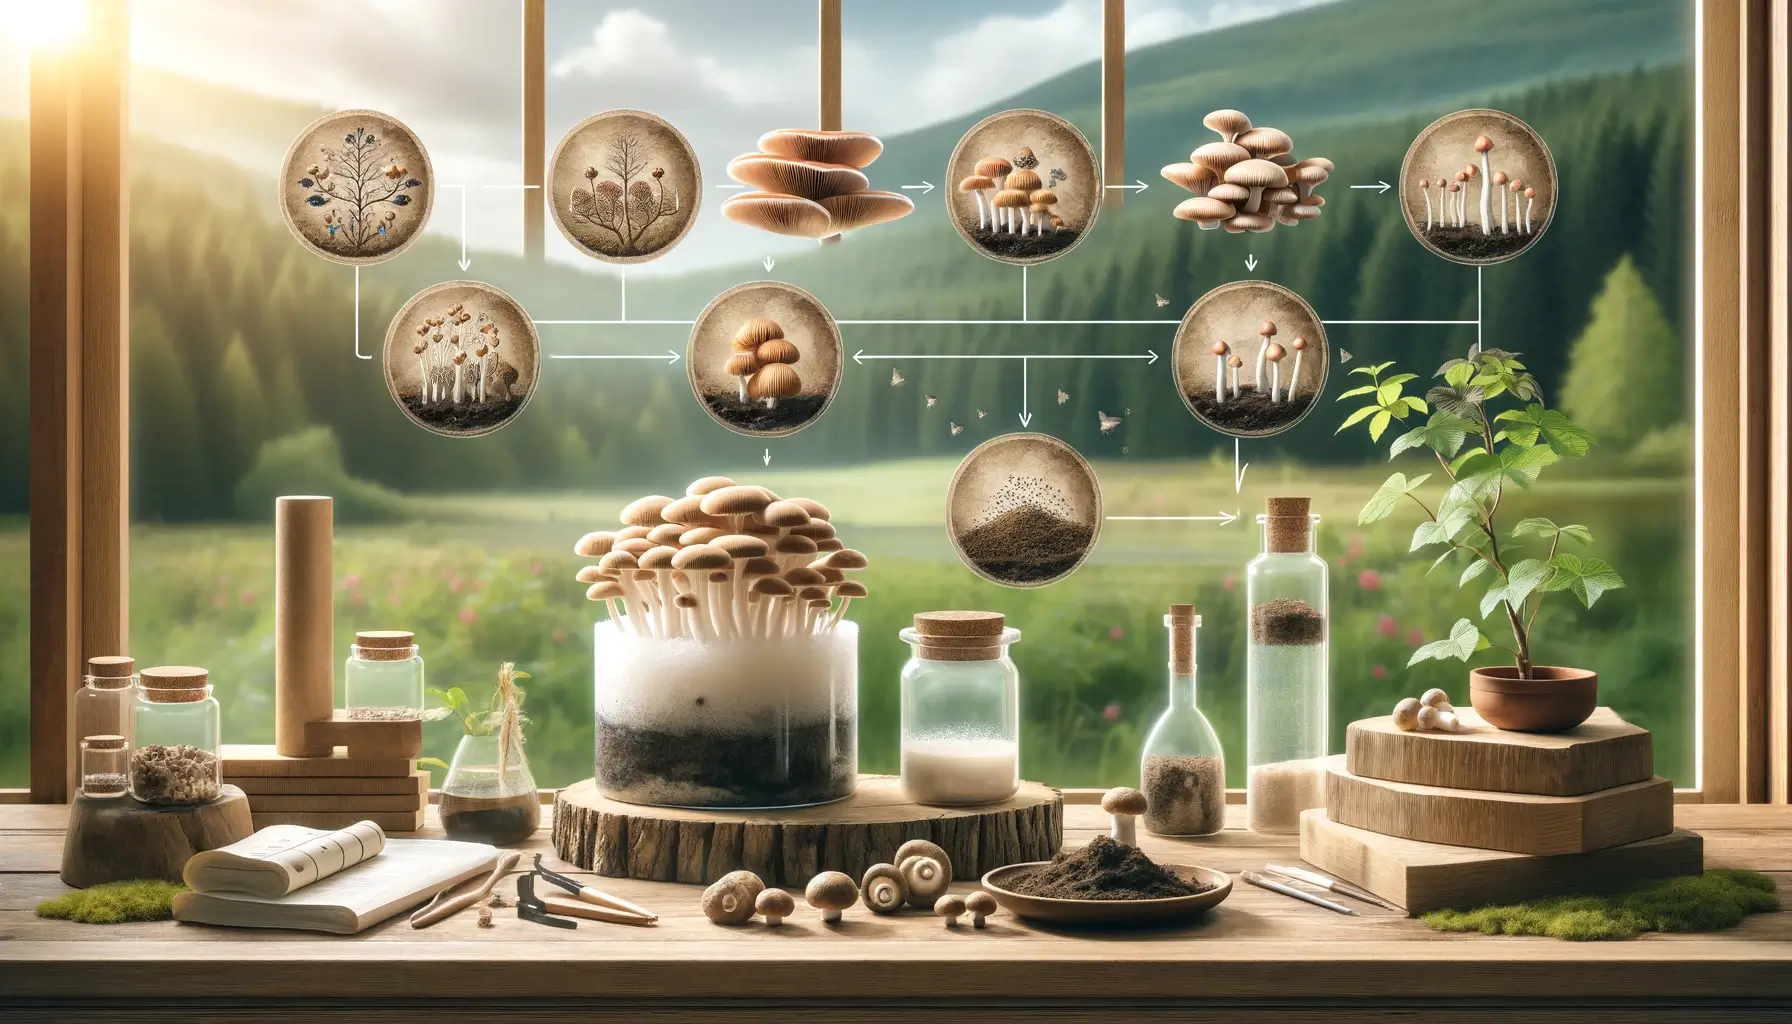 Elegant depiction of mushroom spore cultivation stages, from substrate preparation to growth, in a serene setting.